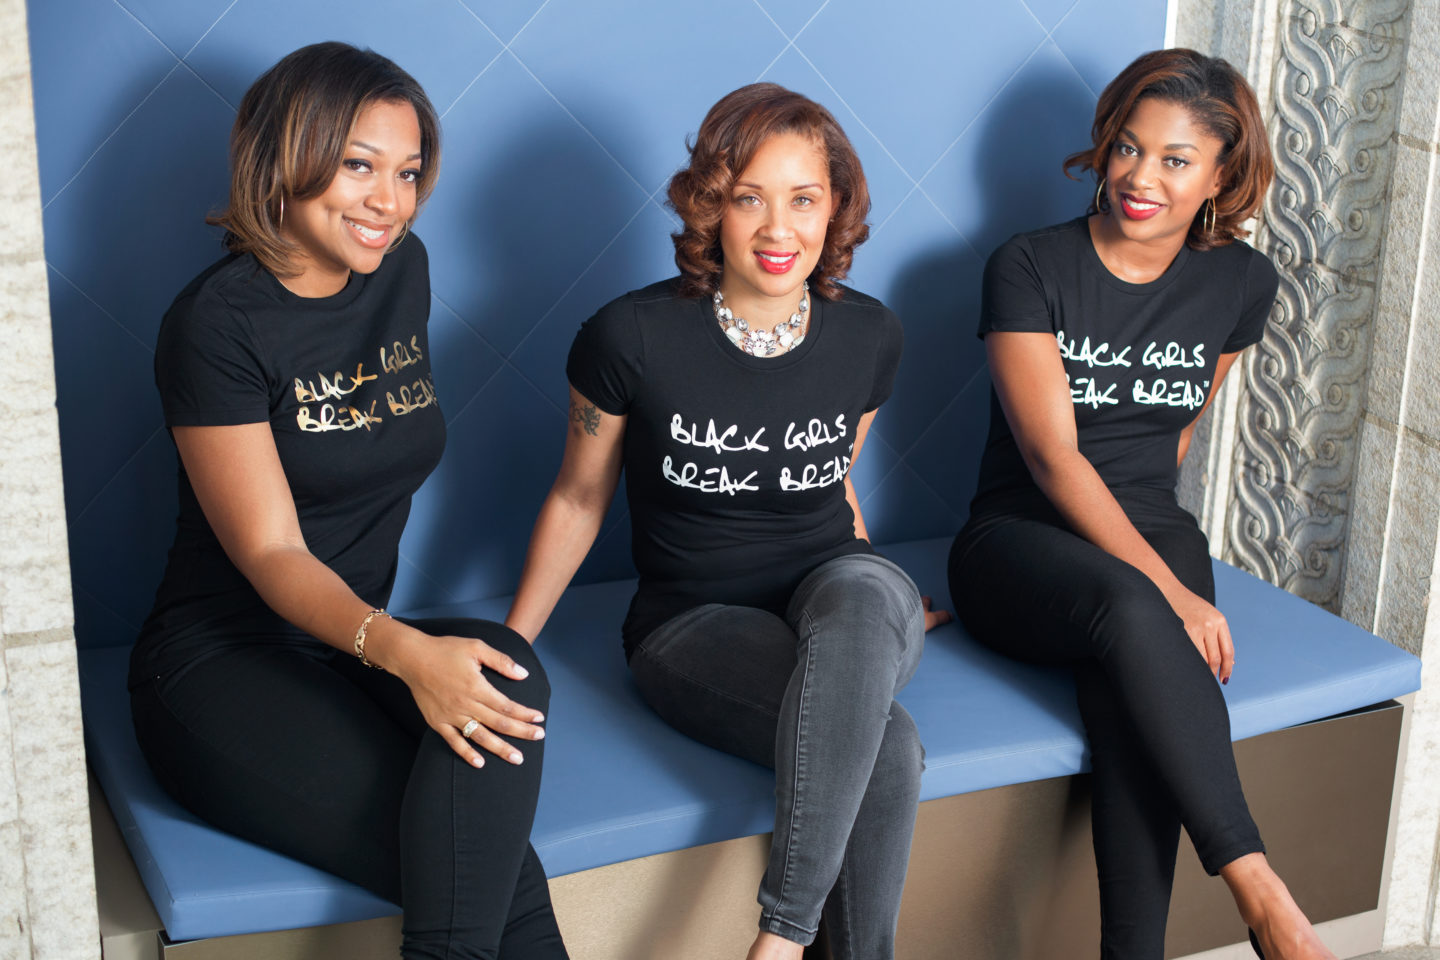 Meet the Organization That is Bringing Black Women Together To Break Bread